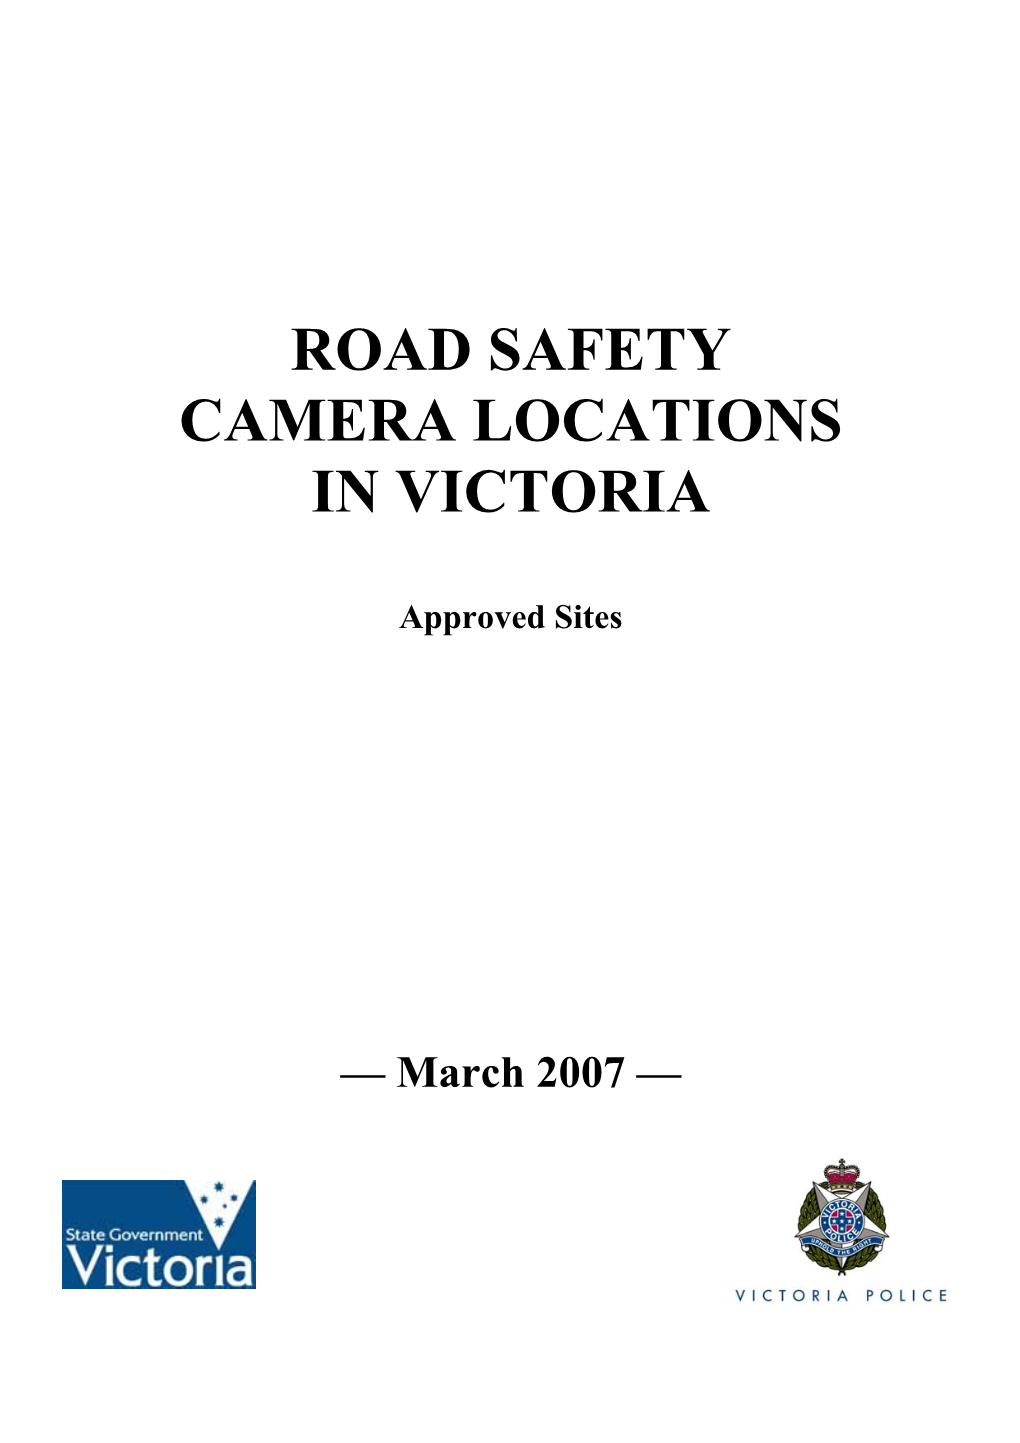 Road Safety Camera Locations in Victoria